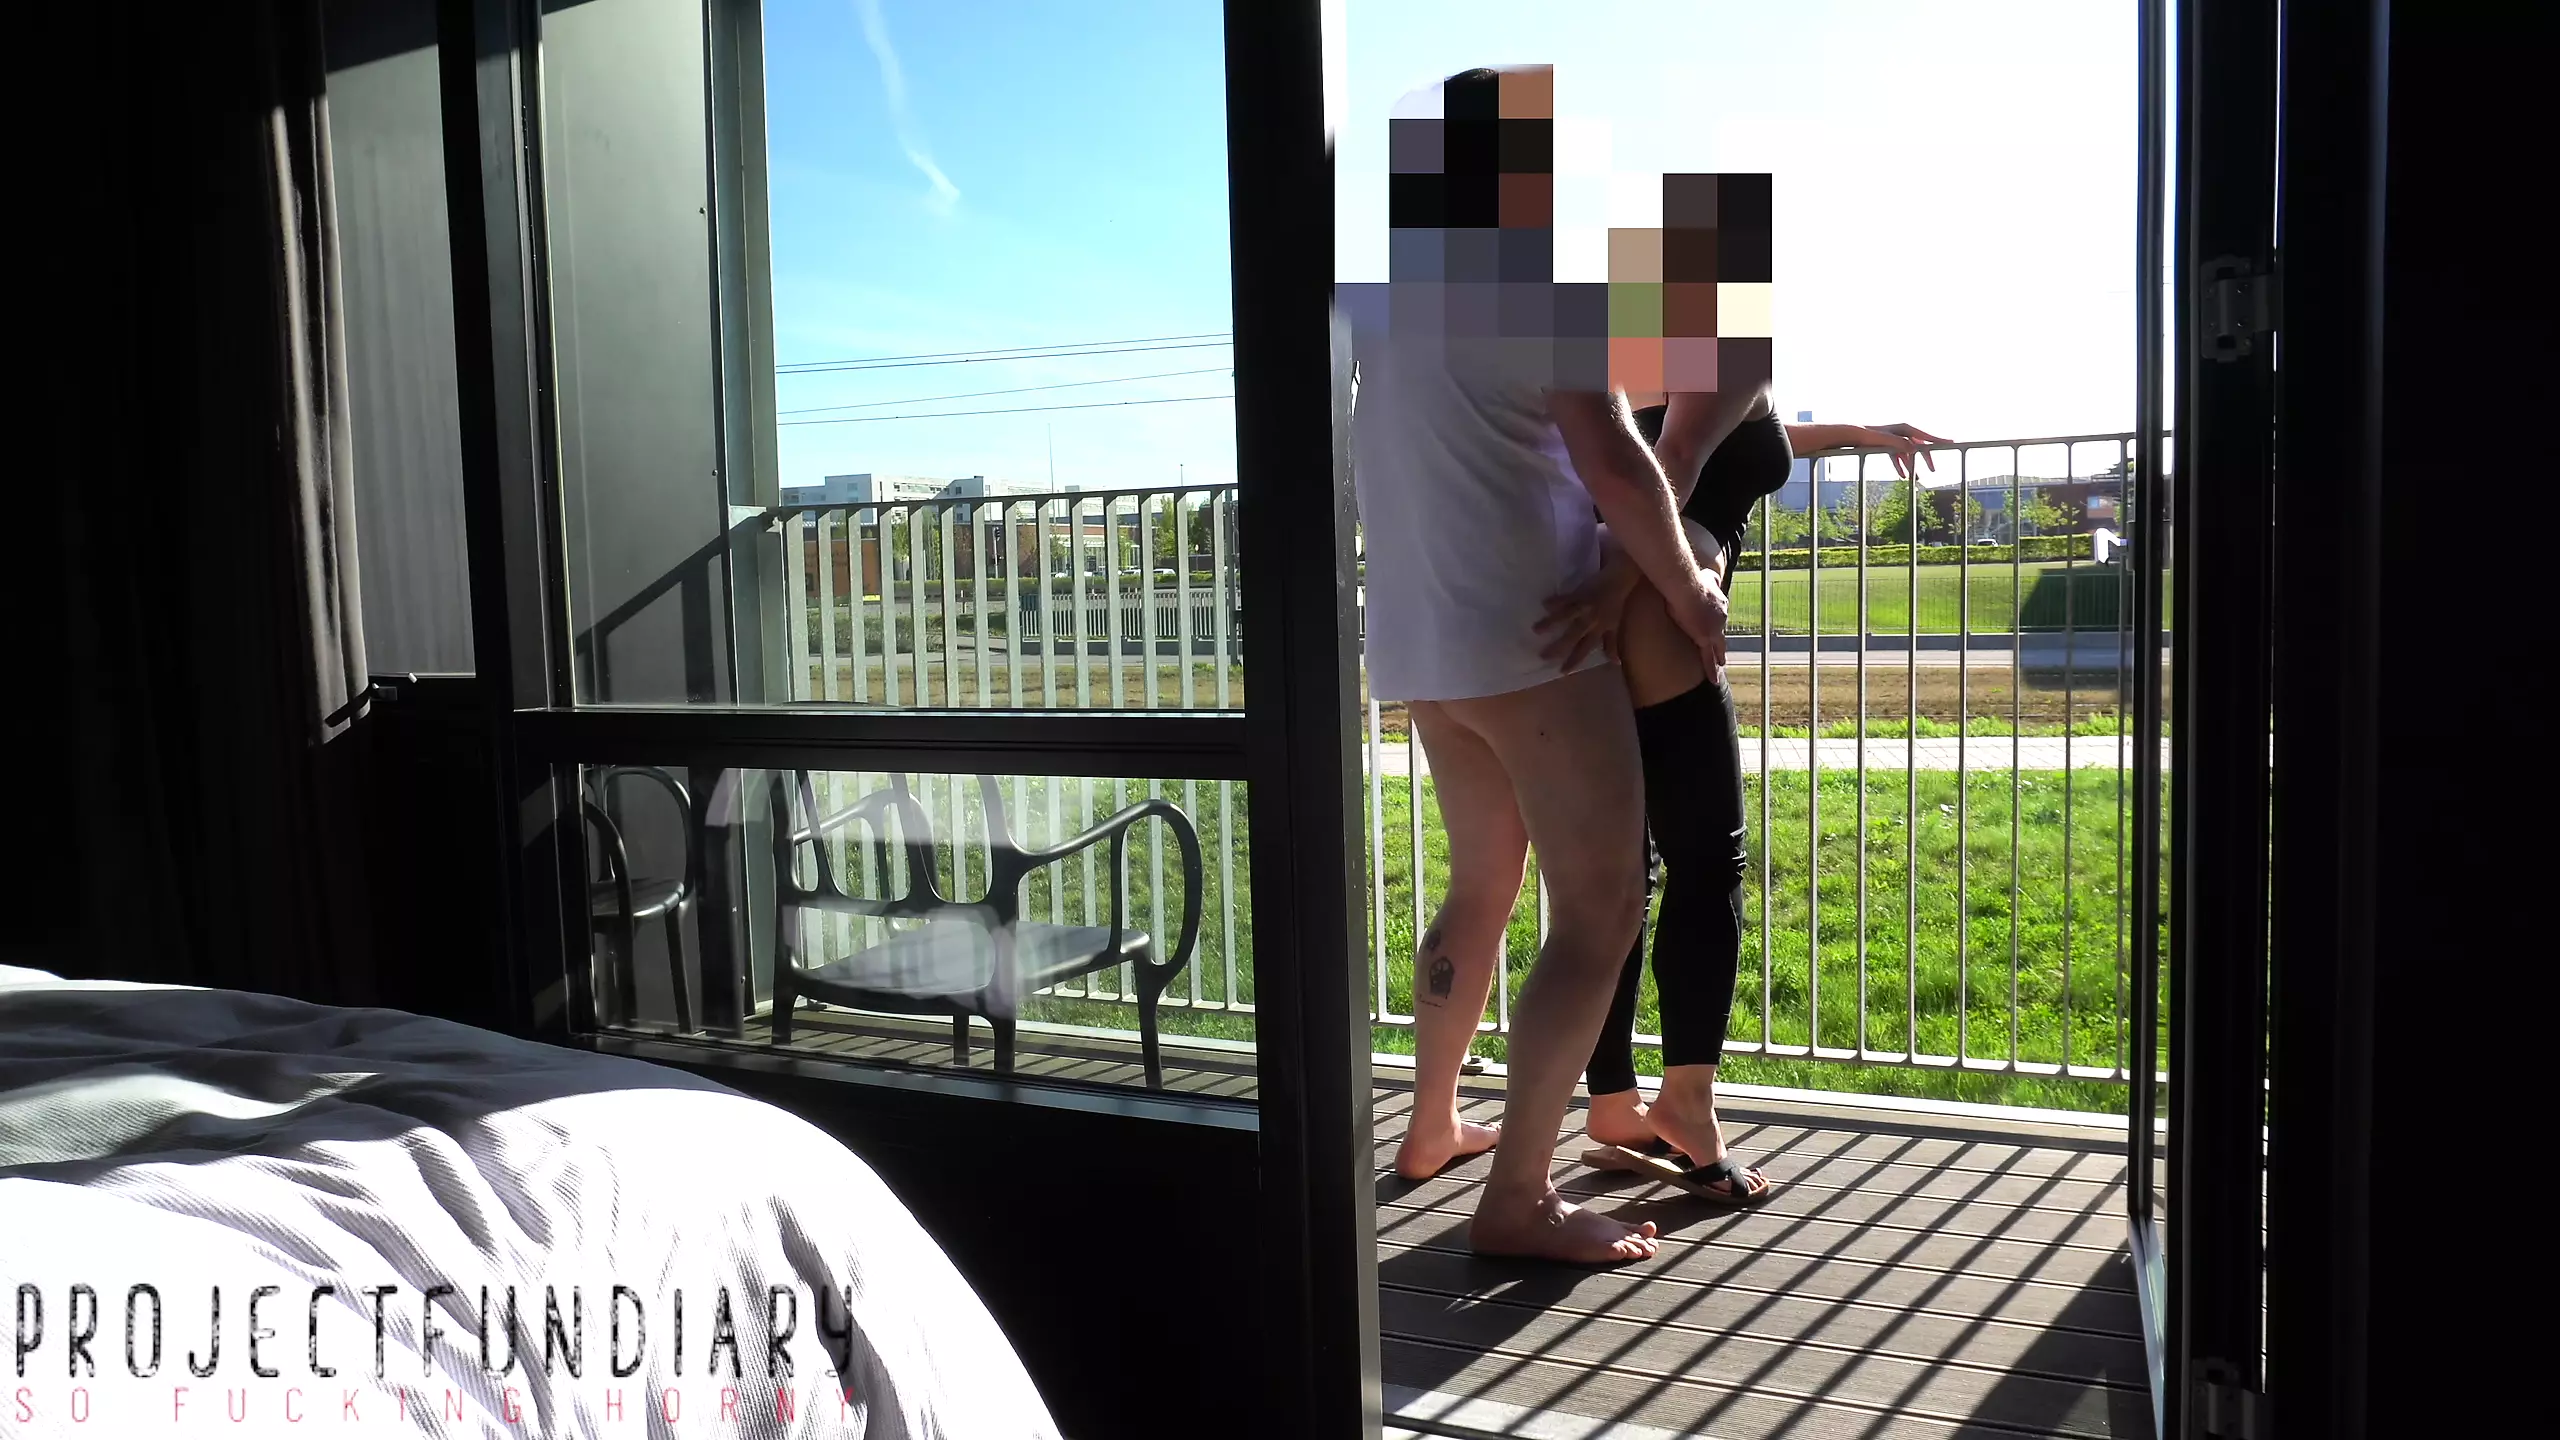 risky public balcony sex with people watching photo